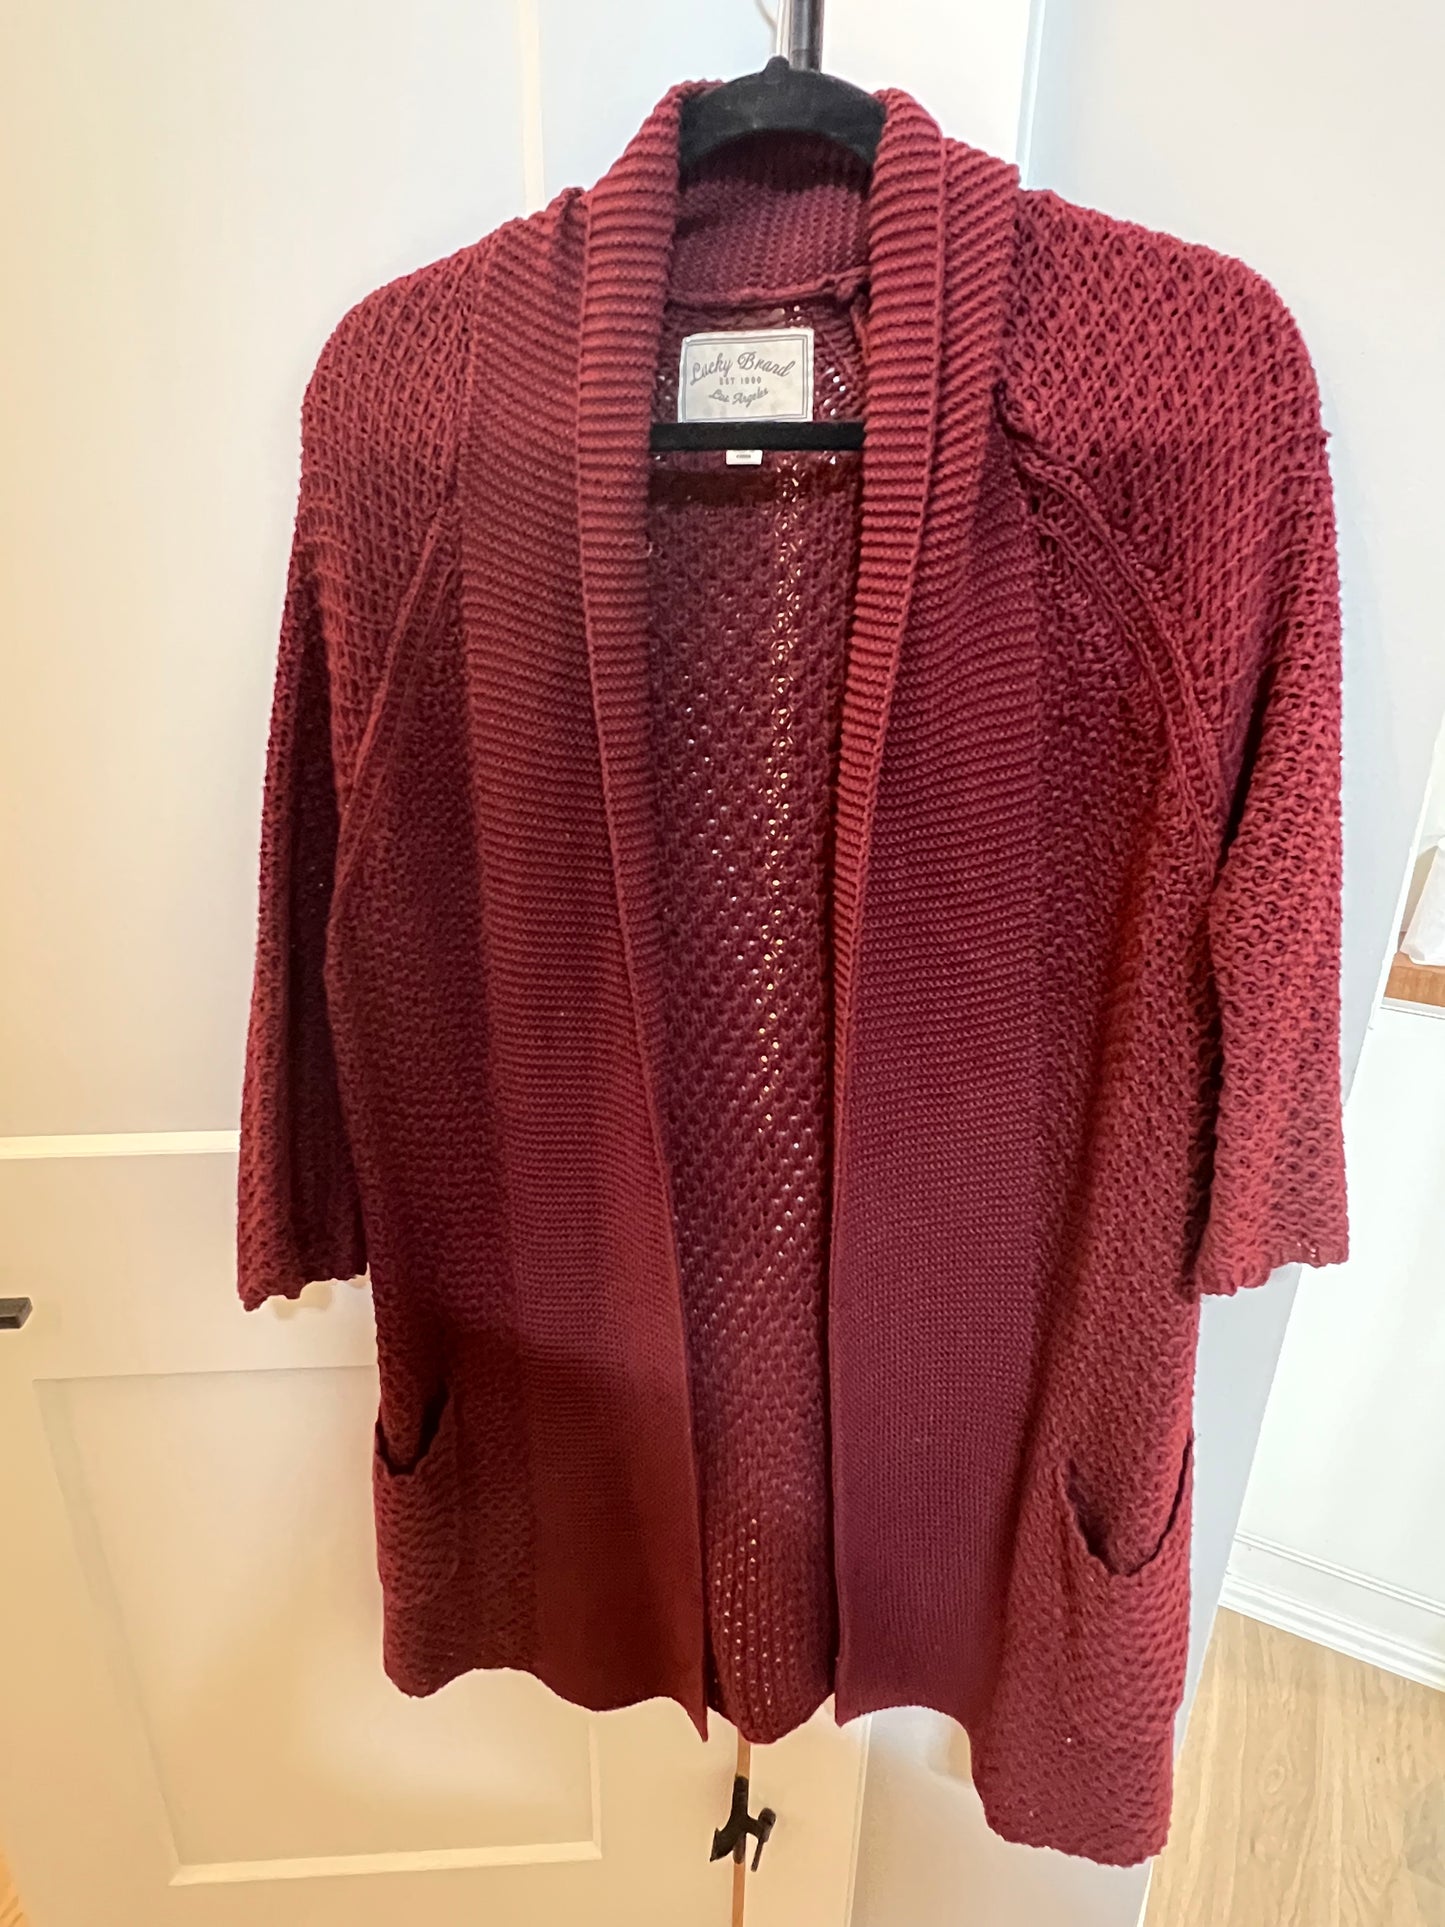 Size s/m womens lucky brand sweater , maroon